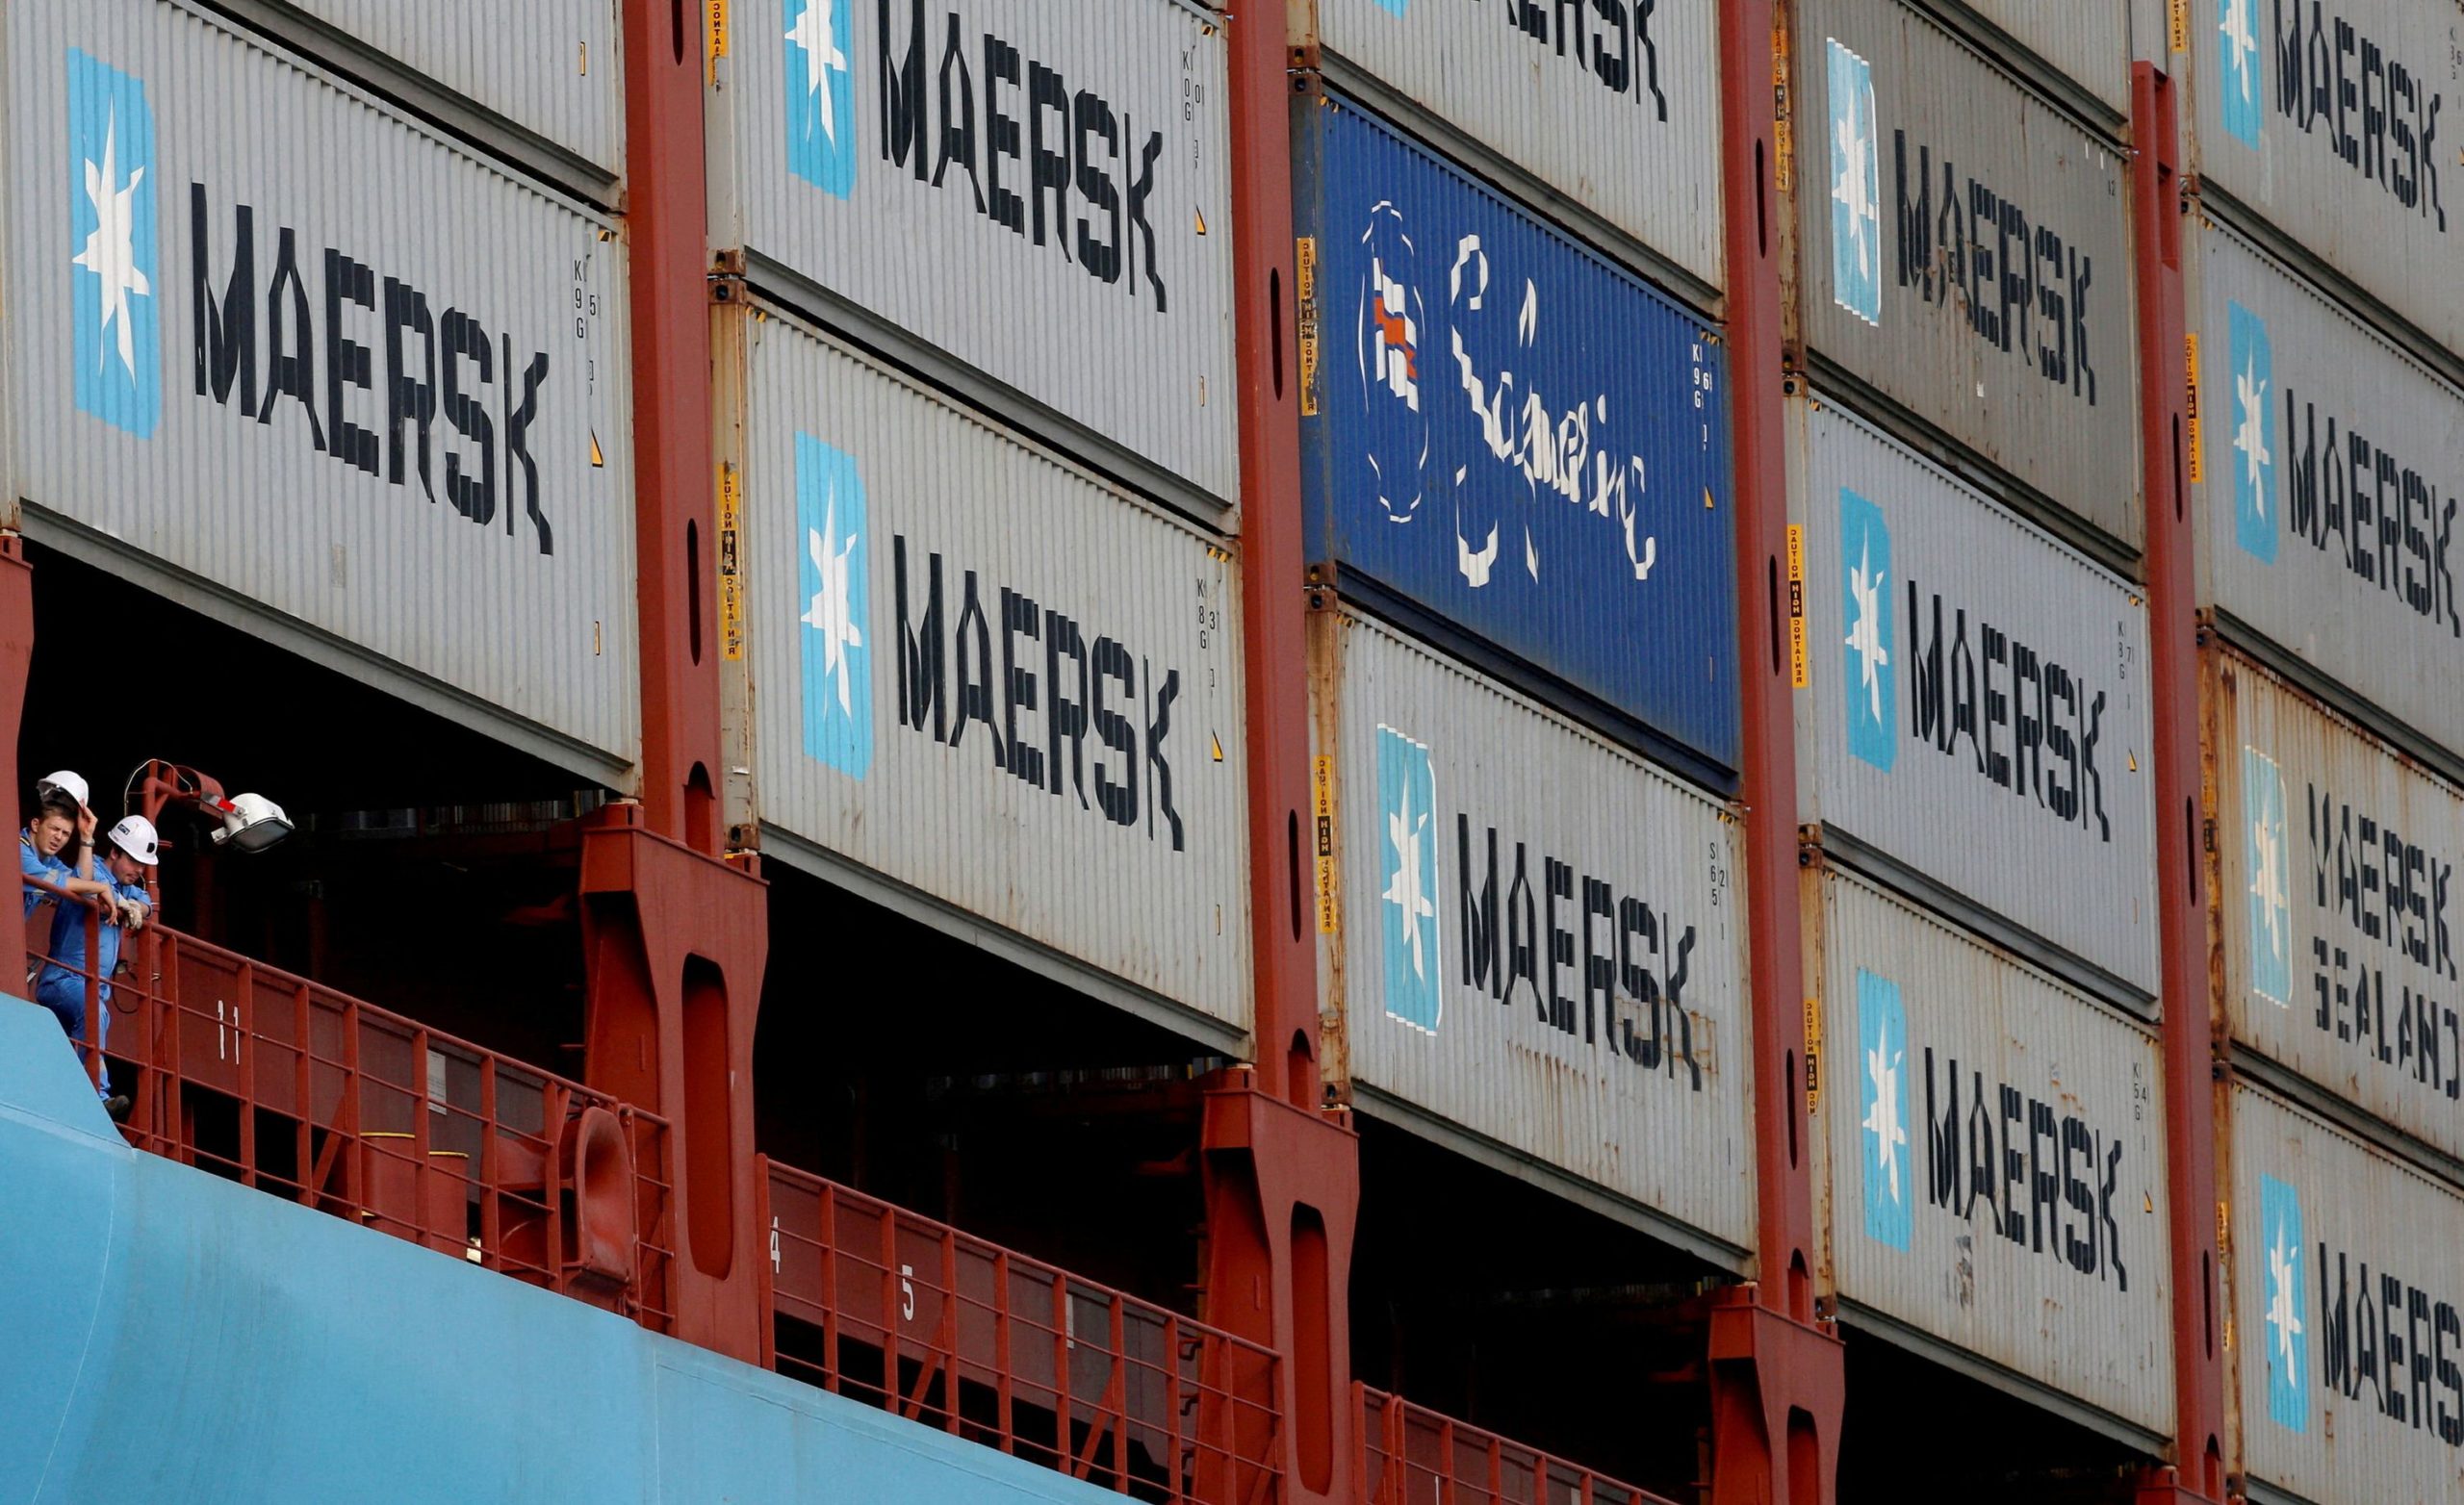 Maersk Introduces Surcharge on Israel Shipments to Cover Insurance